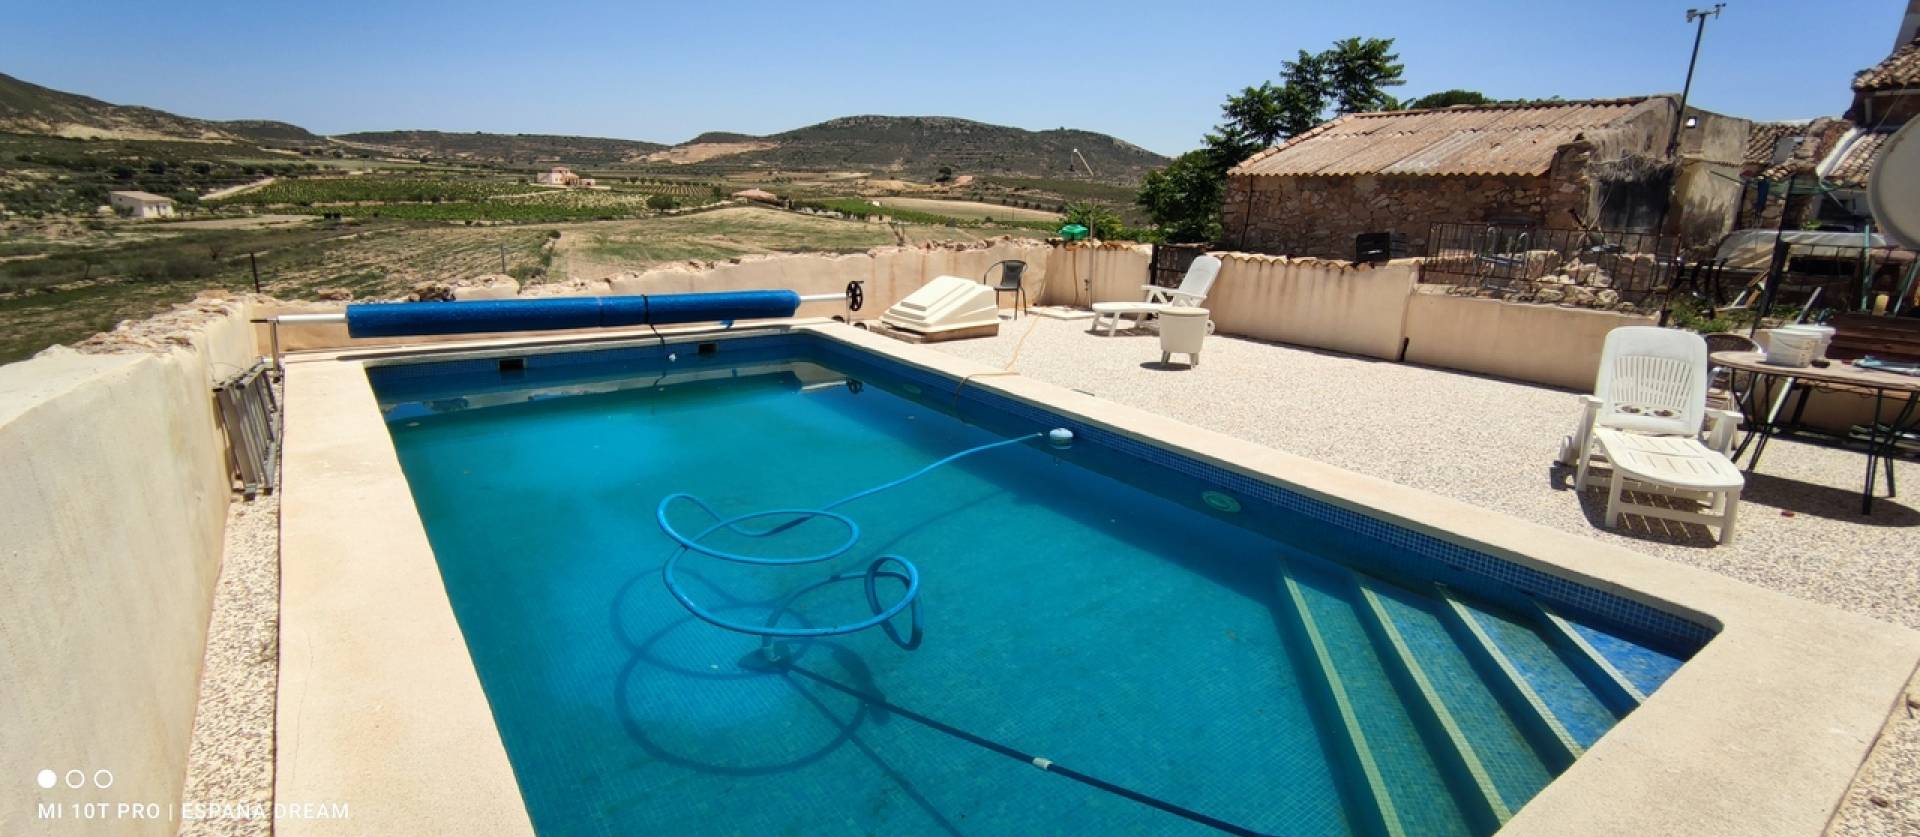 Sale - Country House - Torre Del Rico